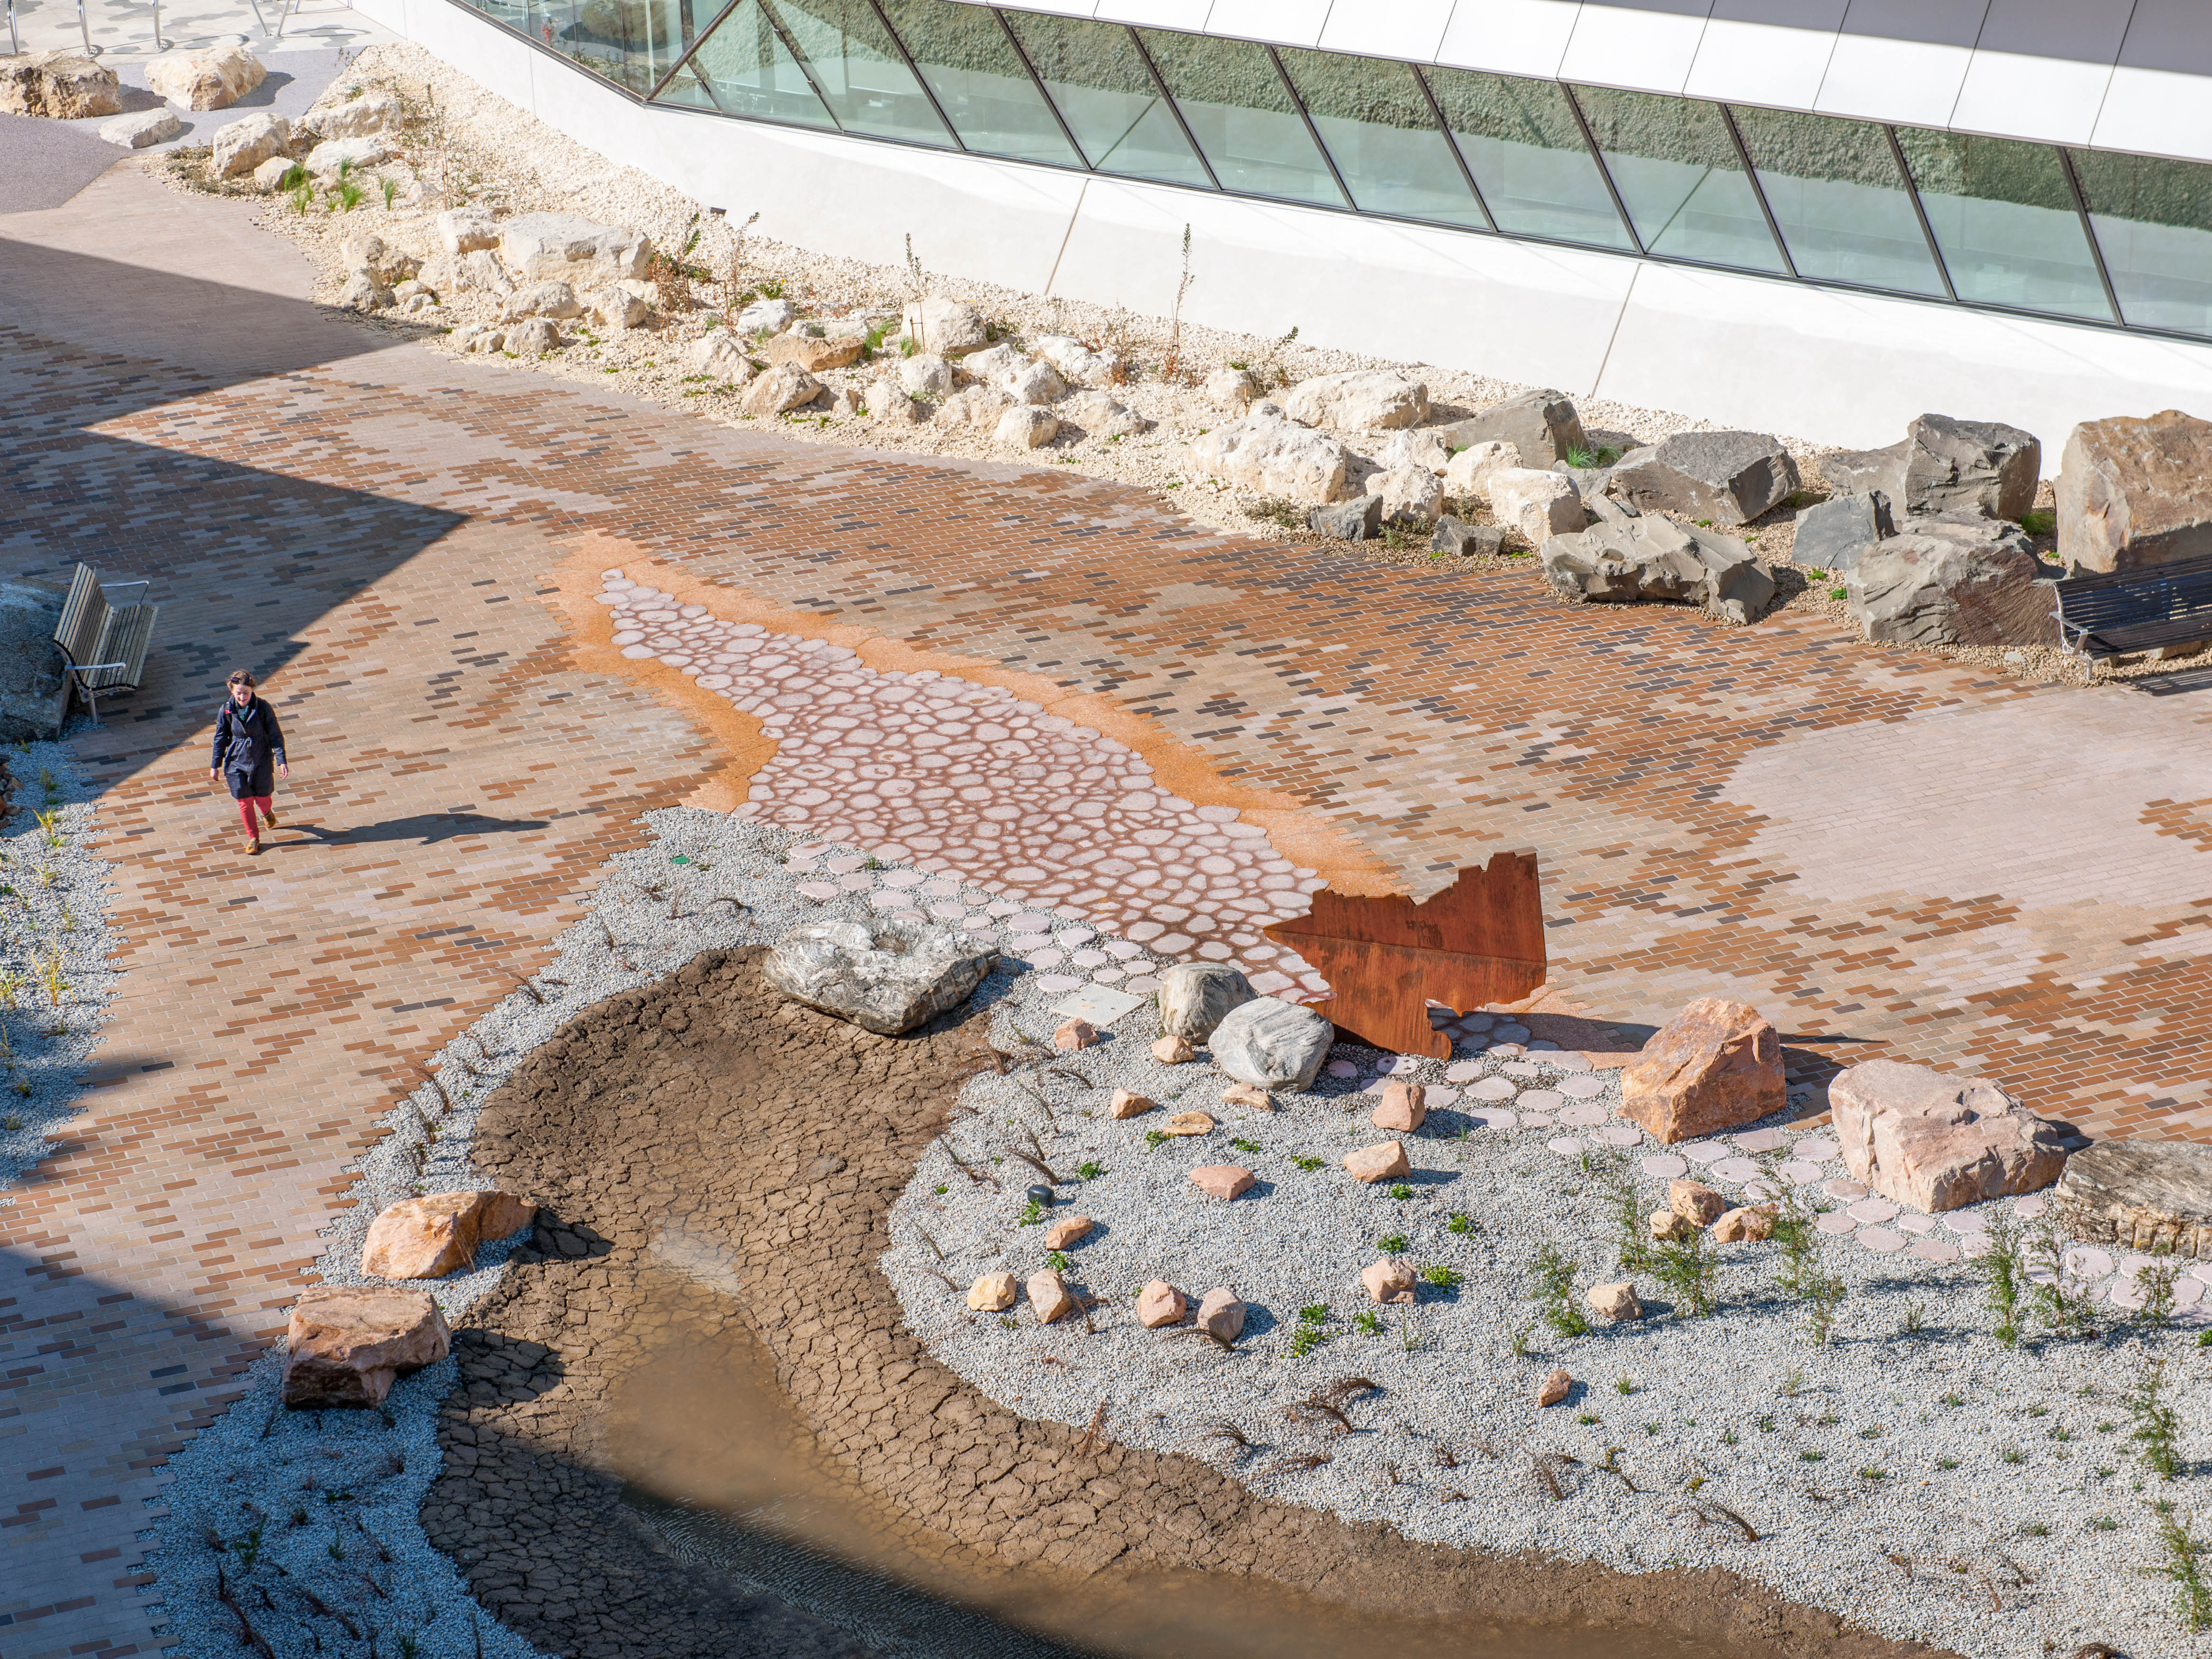 Earth Sciences Garden. Photography by Michael Wright
